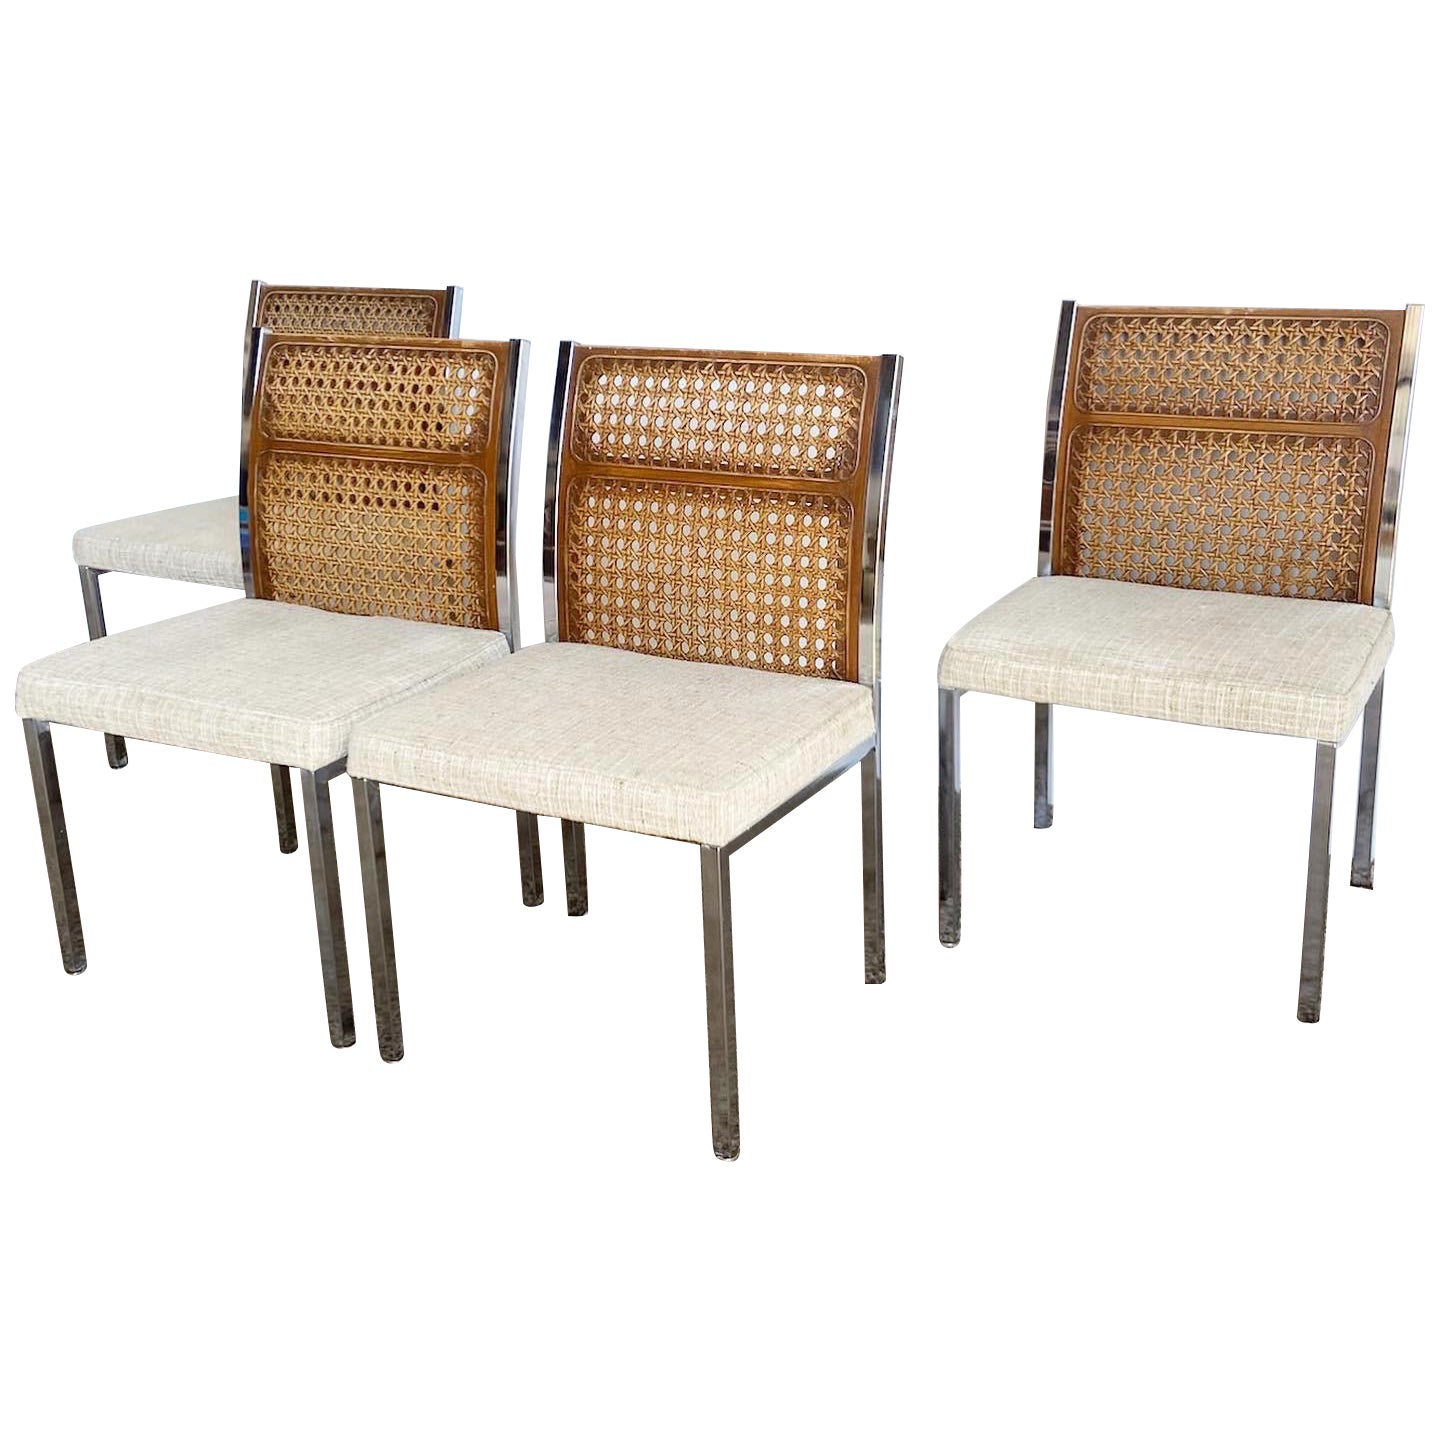 Mid Century Modern Faux Cane and Chrome Dining Chairs - Set of 4 For Sale